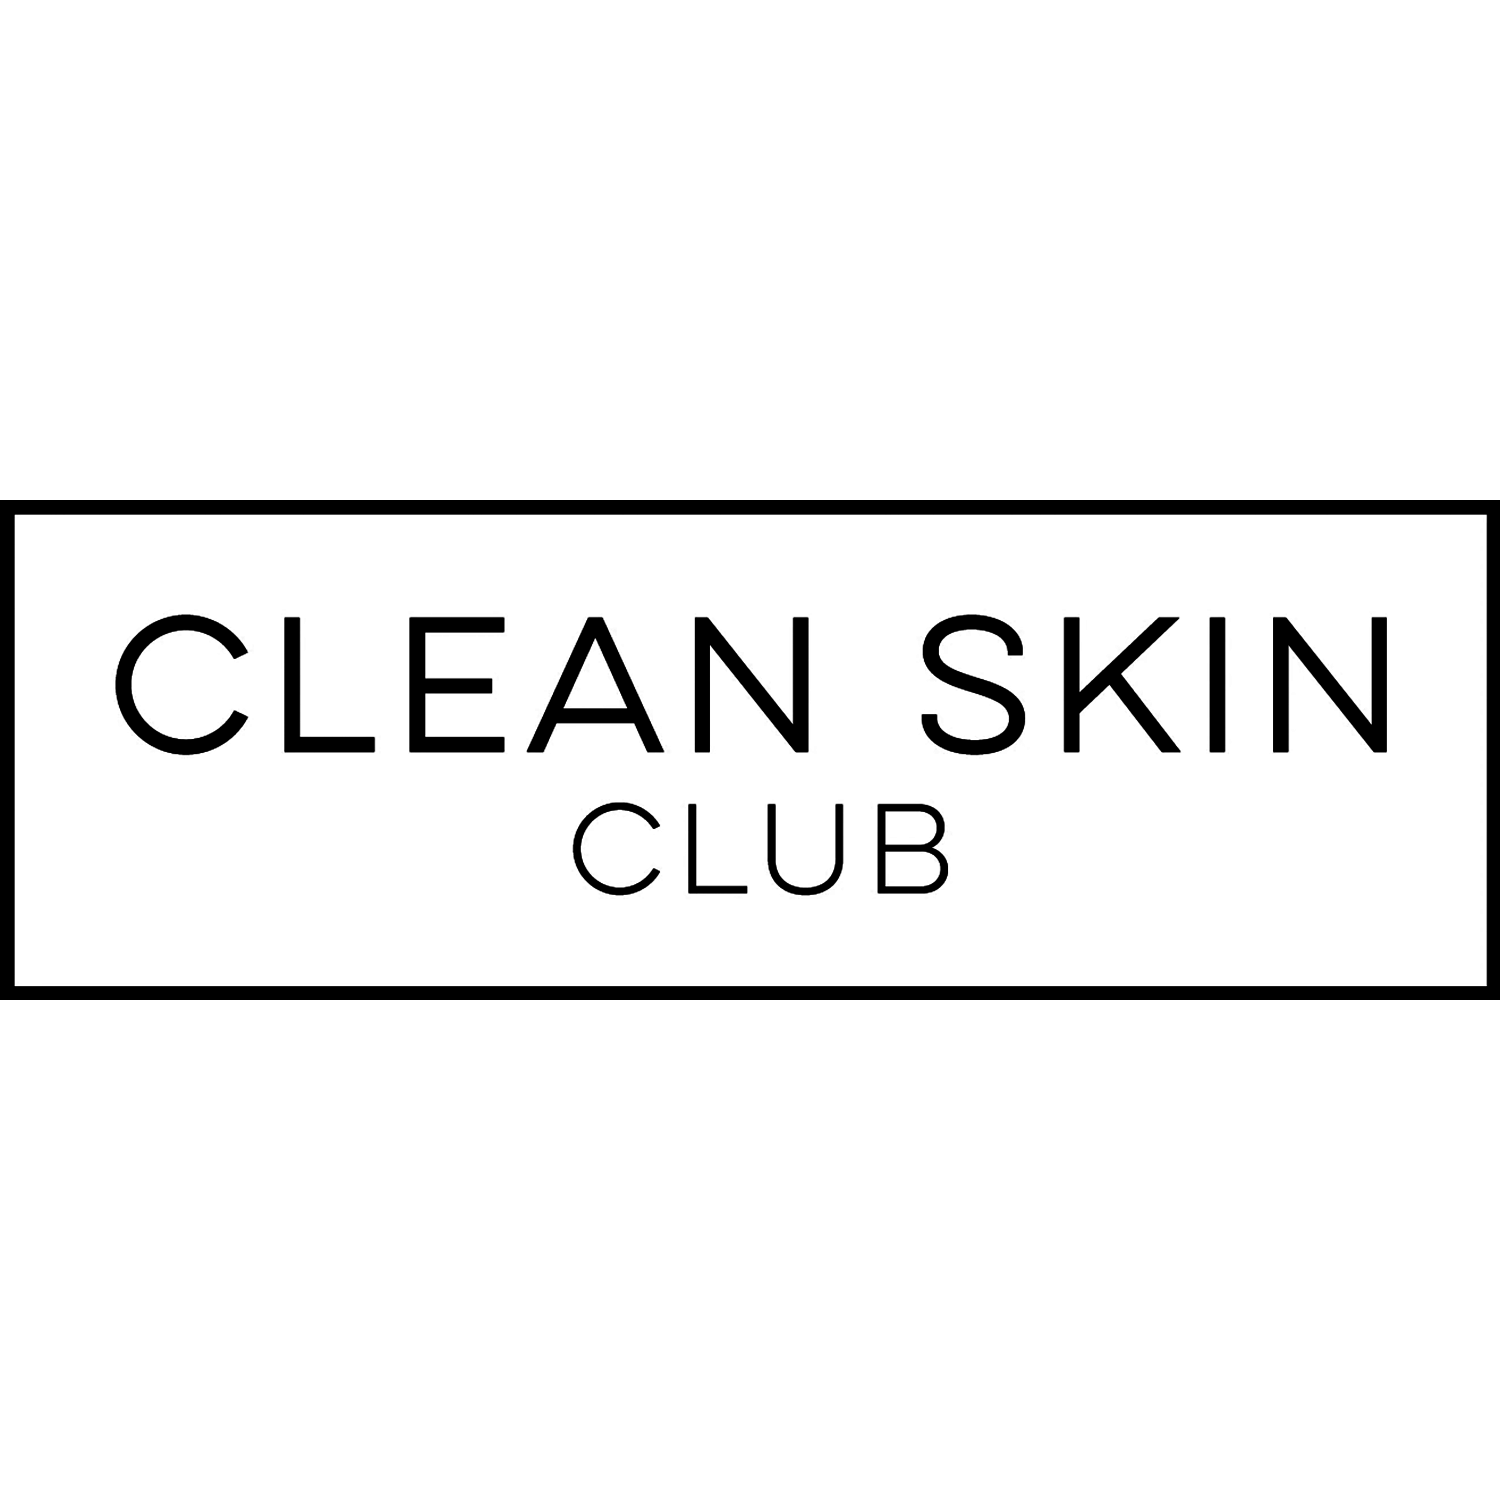 CLEANSKINCLUB.png